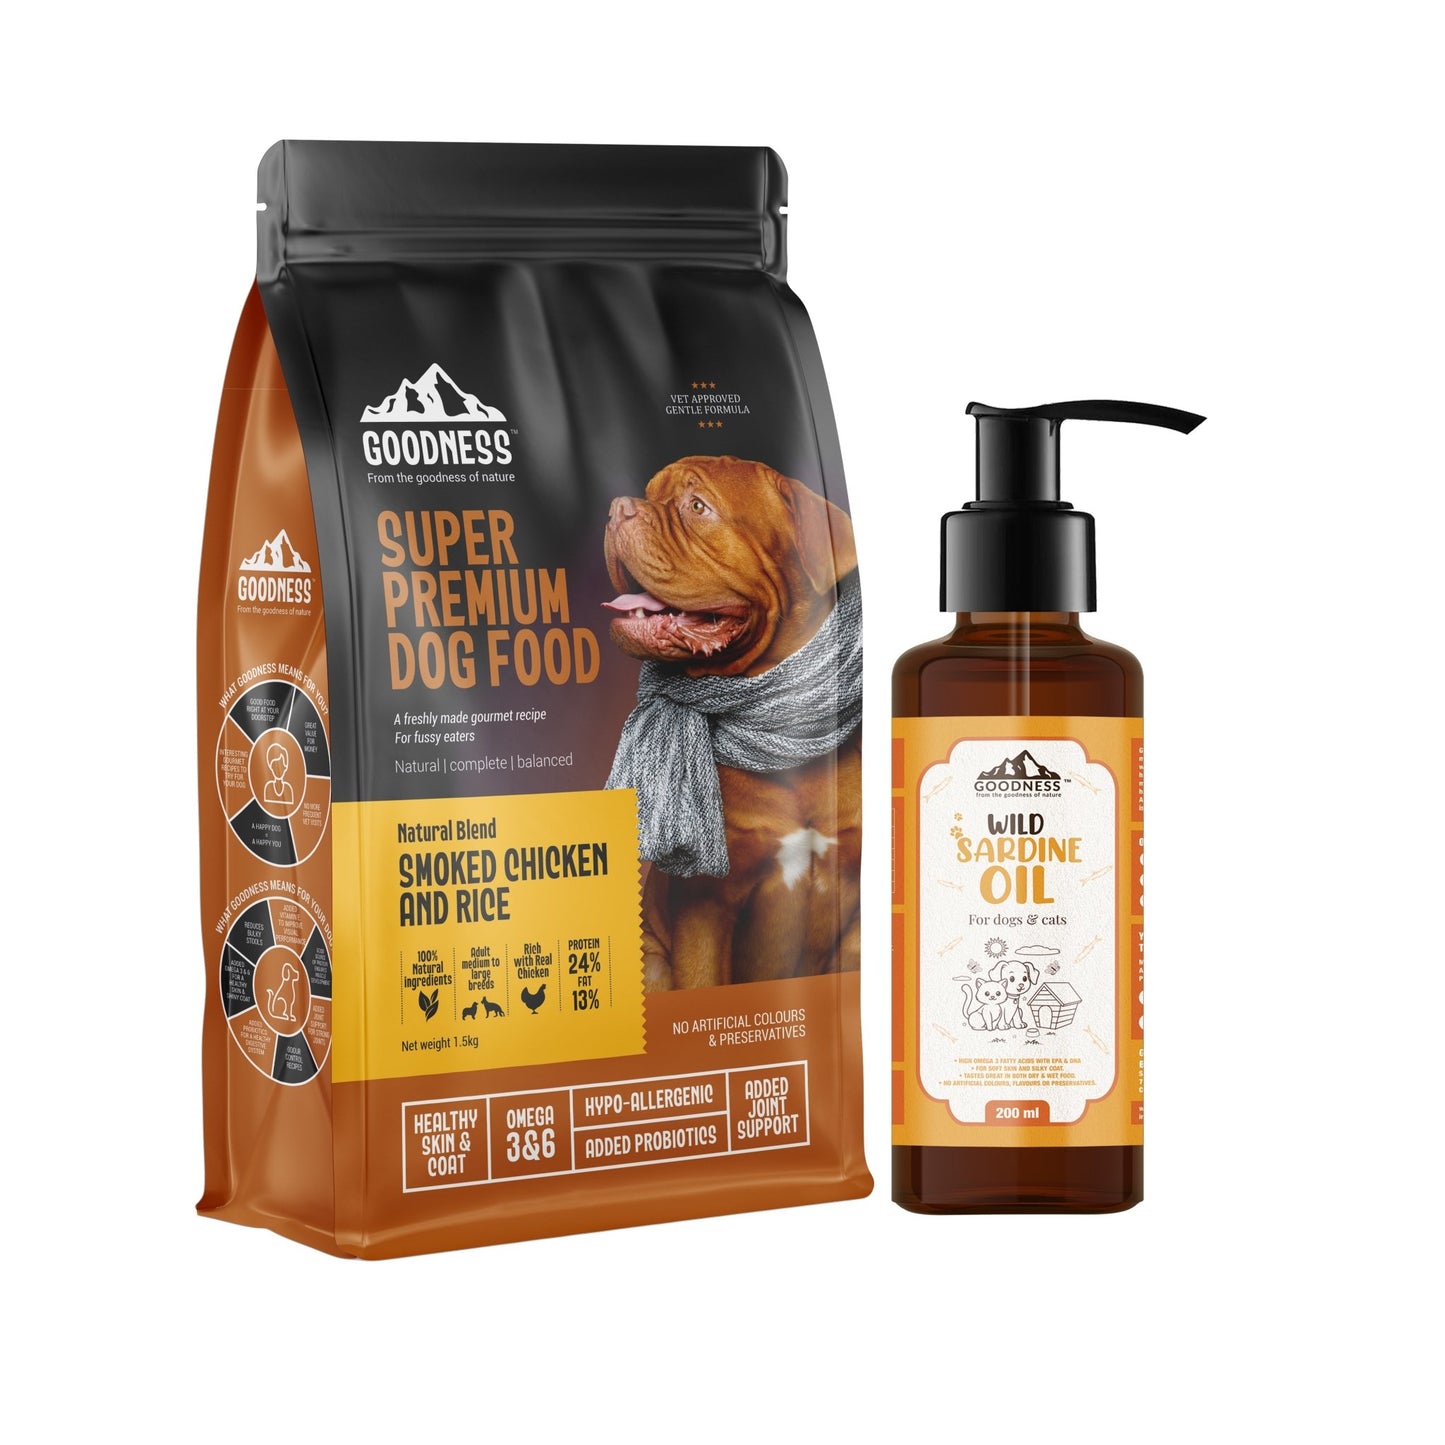 Goodness Natural Blend Smoked Chicken & Rice 1.5kg with Free Sardine oil 200ml - Wagr - The Smart Petcare Platform